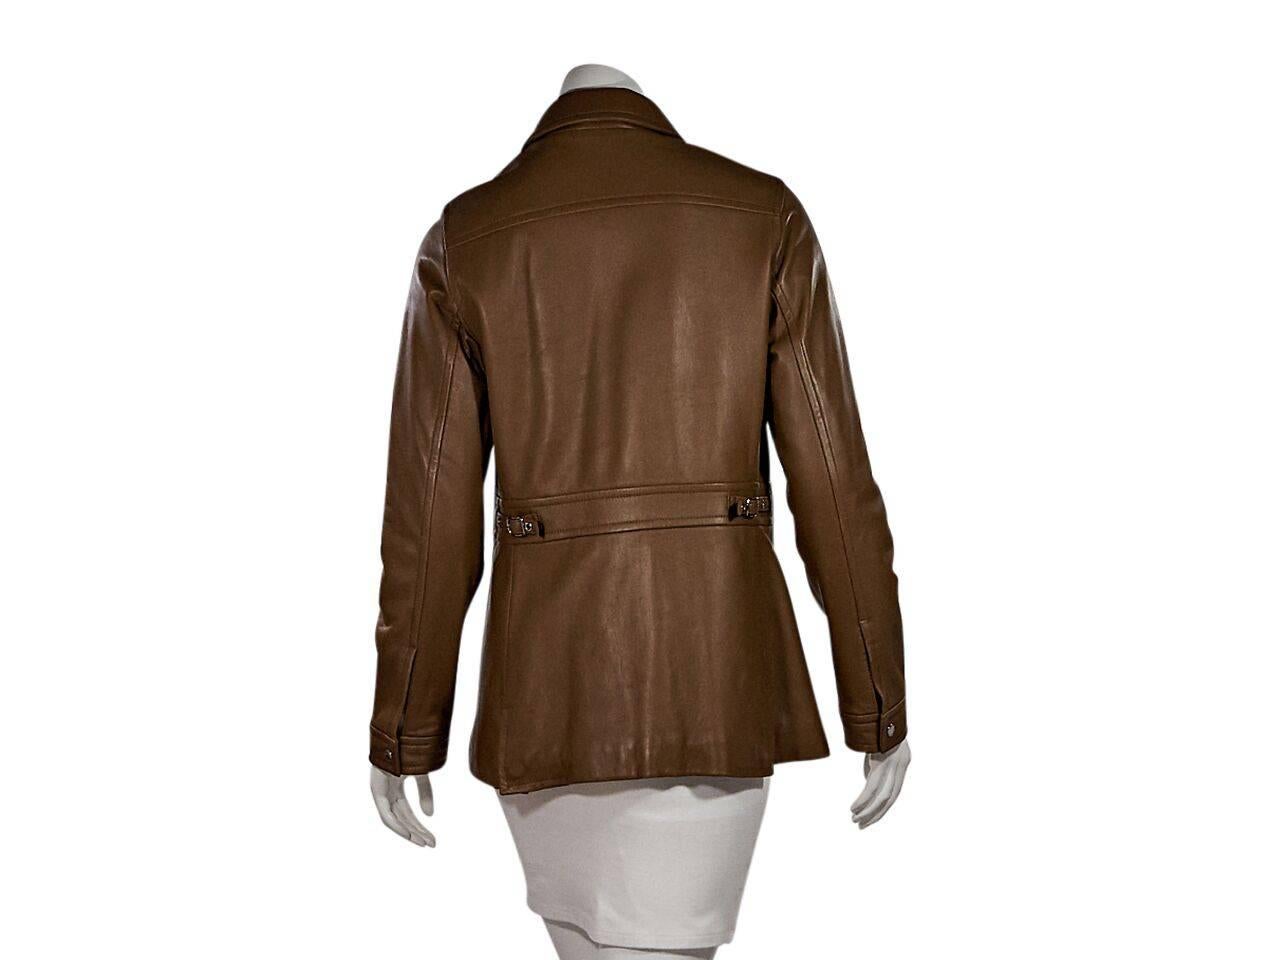 Product details:  Tan leather jacket by Coach. Point collar.  Long sleeves.  Single button cuffs.  Concealed front closure.  Waist slide pockets.   Side waist buckle accents.  Silvertone hardware. 
Condition: Pre-owned. Very good.
Est. Retail $